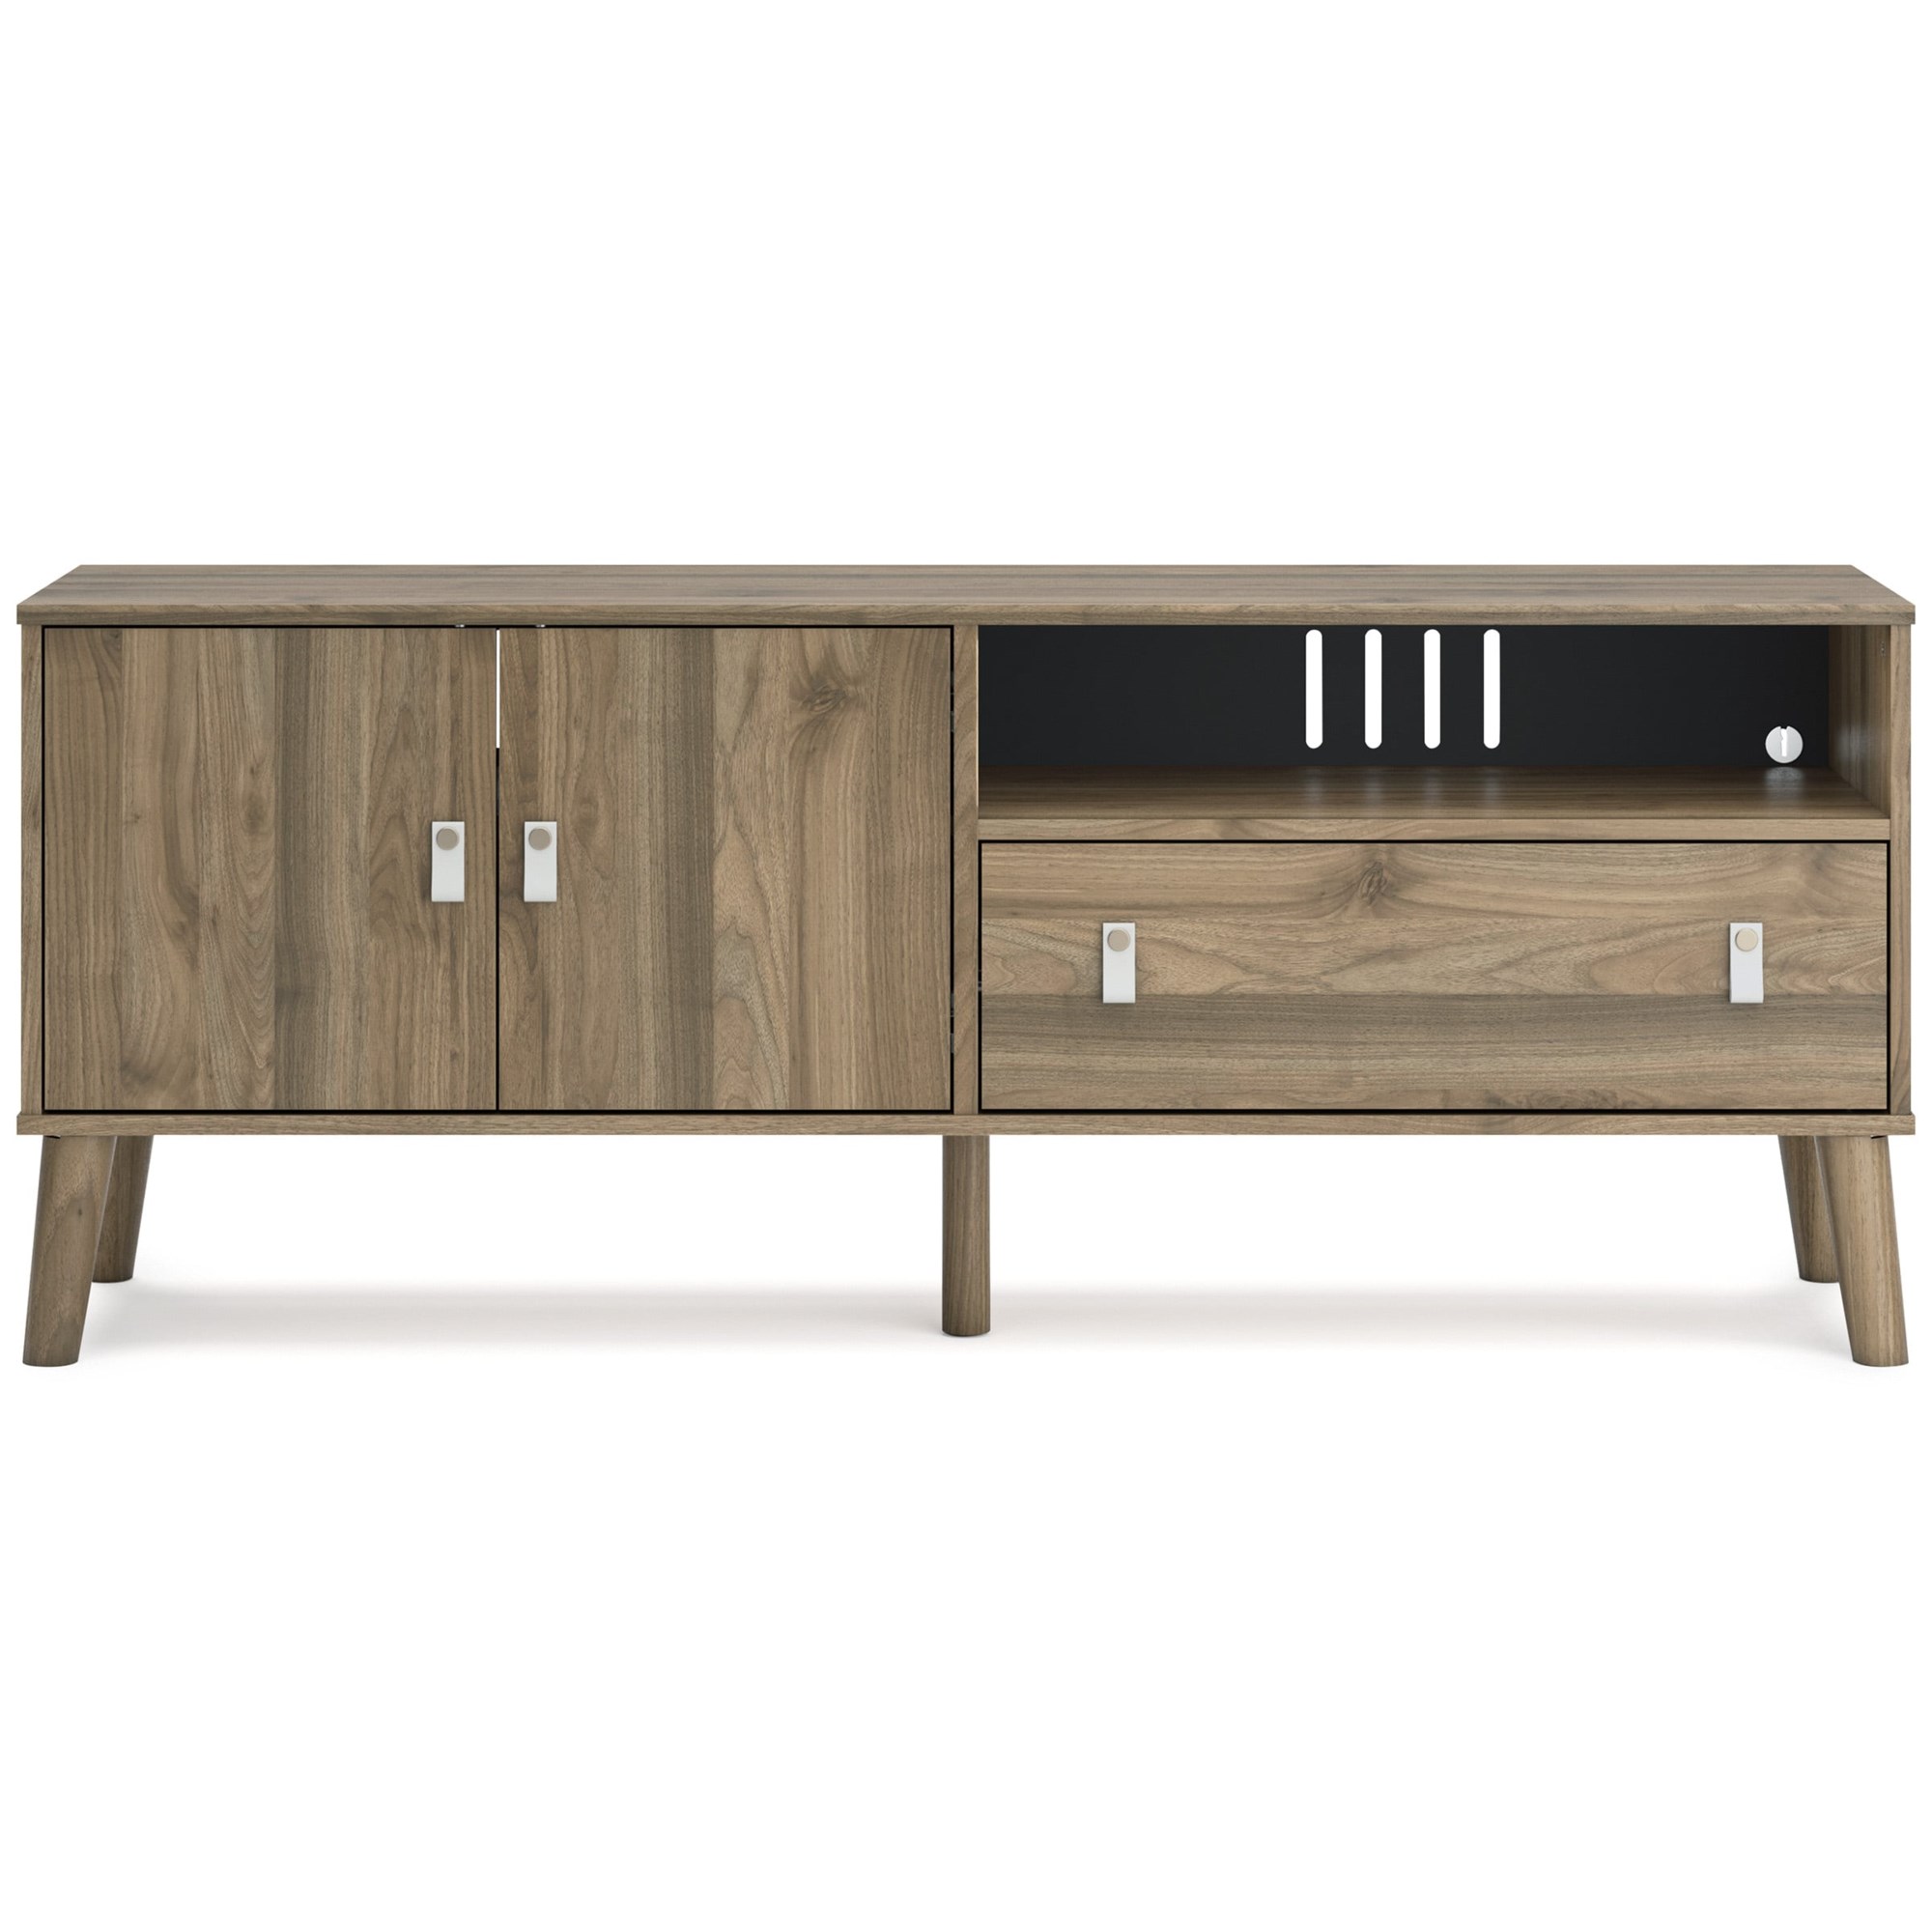 Signature Design by Ashley Aprilyn EW1024-268 59 TV Stand